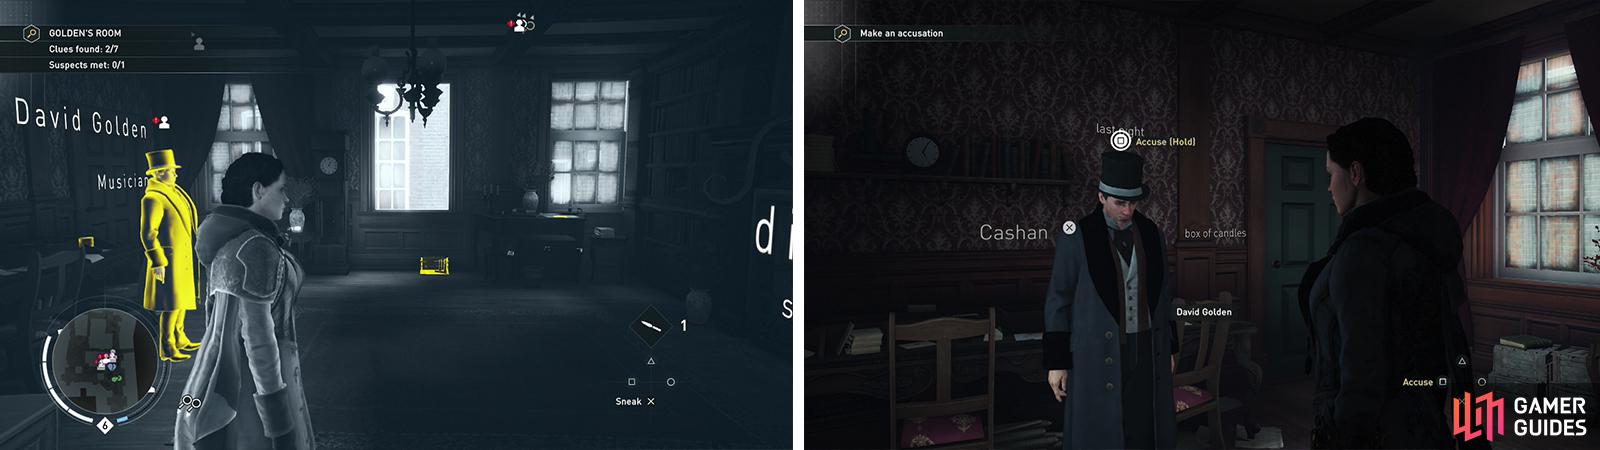 Loot the clues in the Golden's Room (left) and then chat with the suspect (right).